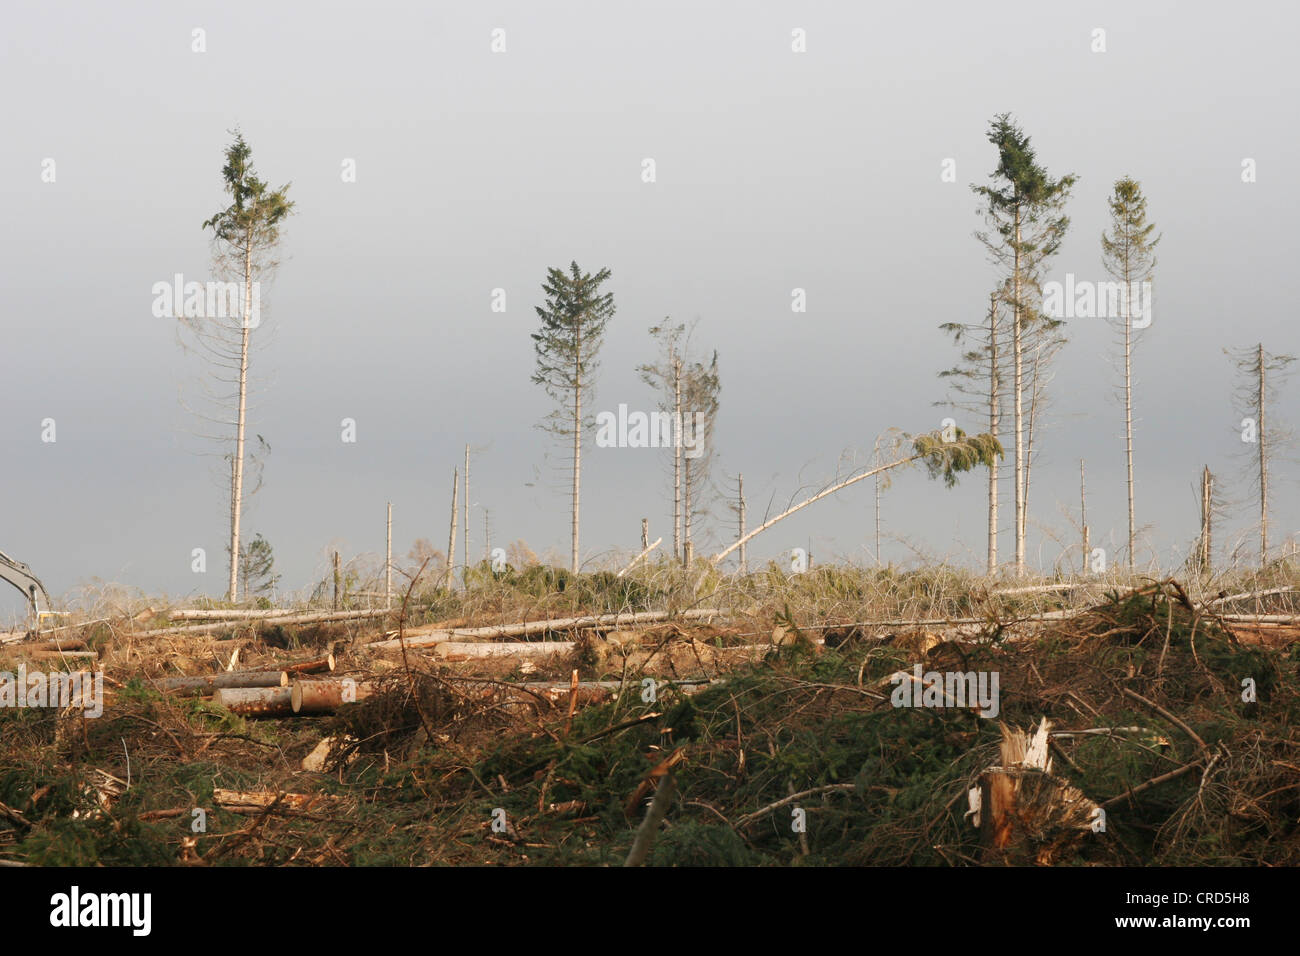 Norway spruce (Picea abies), storm loss in a forest, Germany, North Rhine-Westphalia, Sauerland Stock Photo